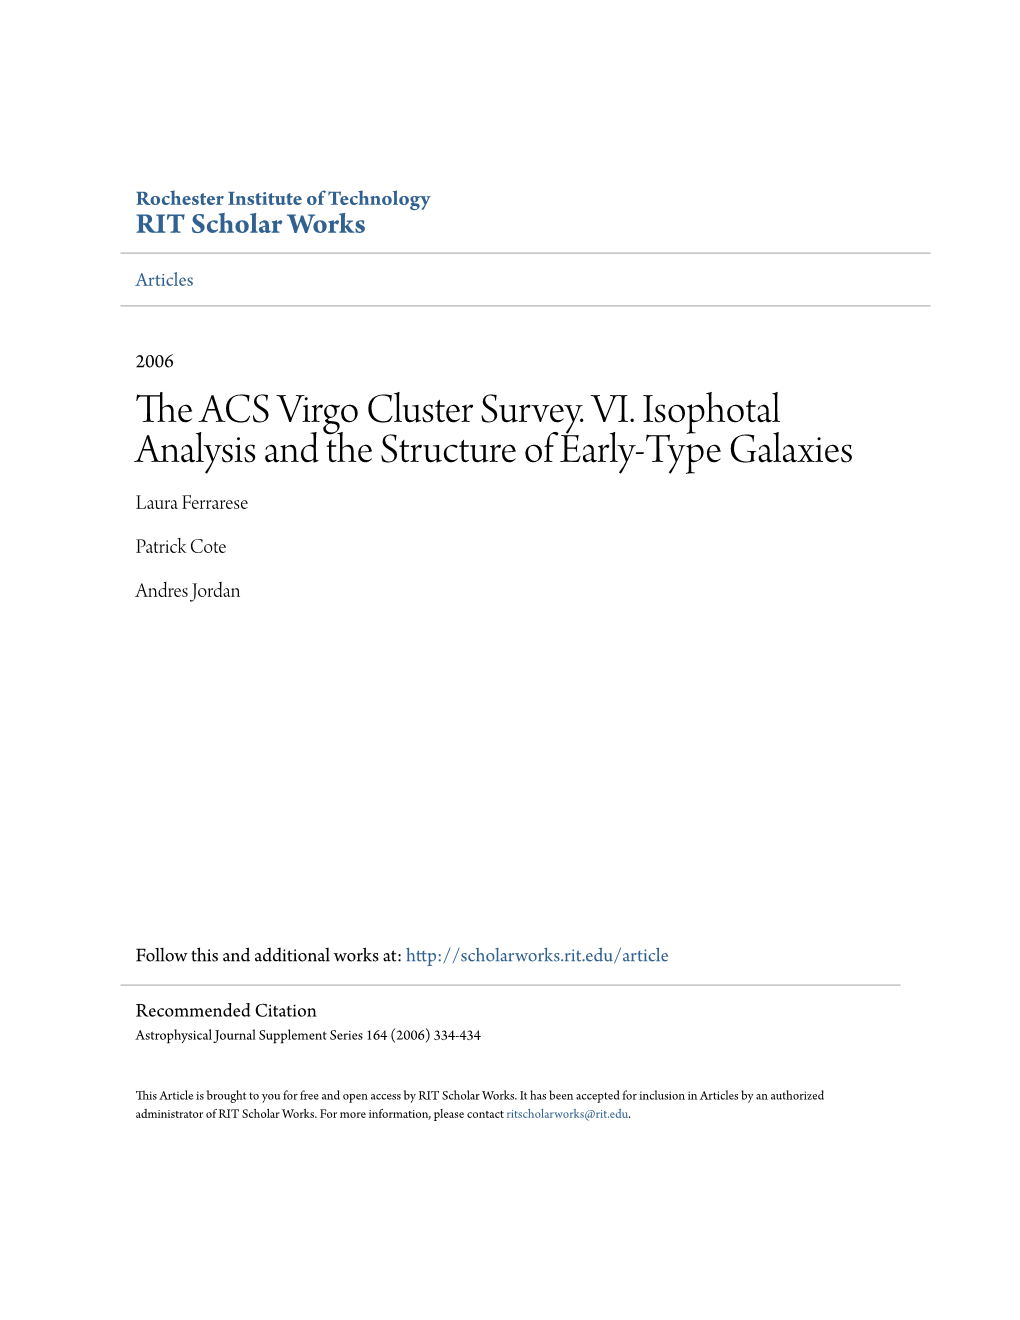 The ACS Virgo Cluster Survey. VI. Isophotal Analysis and The